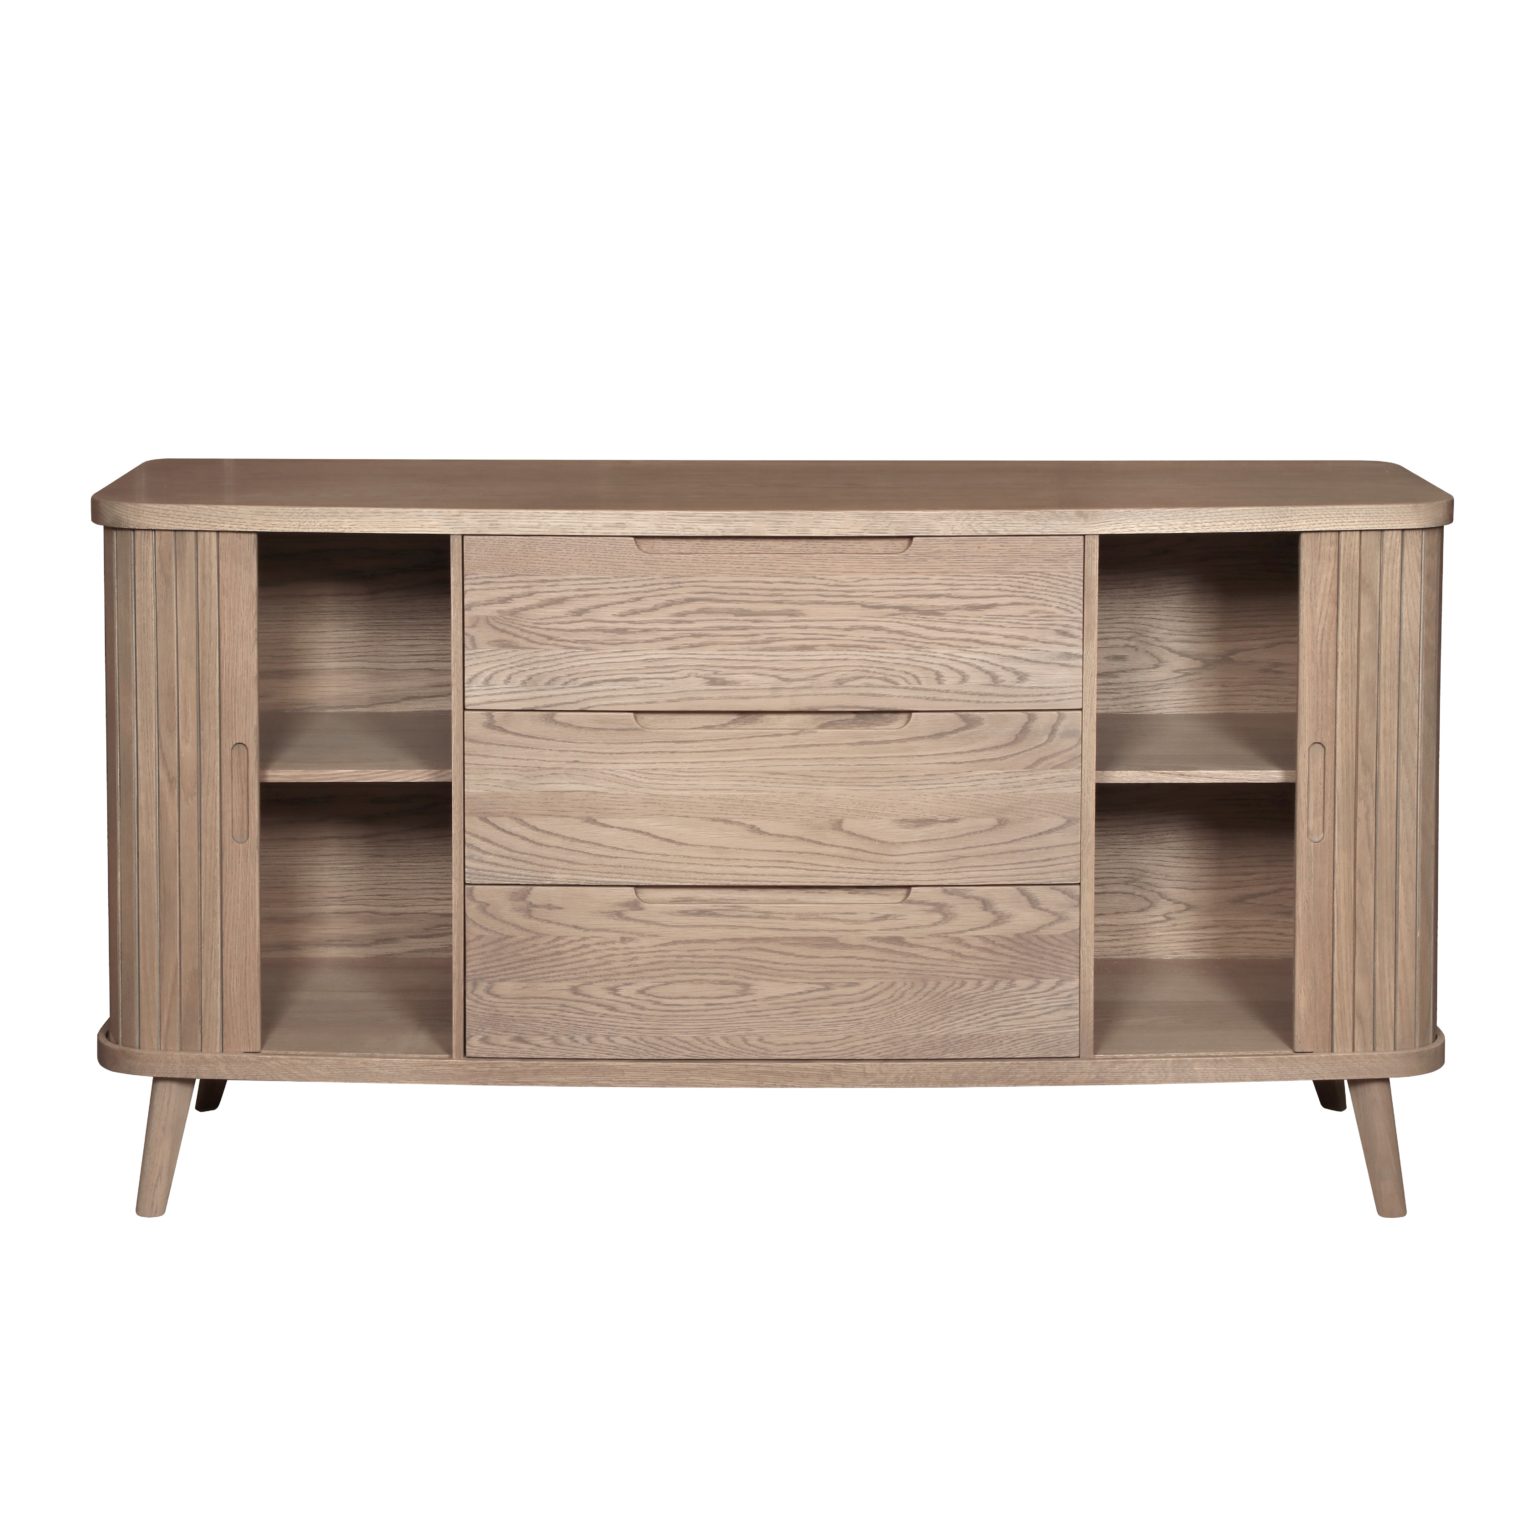 Tambour Sideboard - Grey Oiled - Edmunds and Clarke Furniture